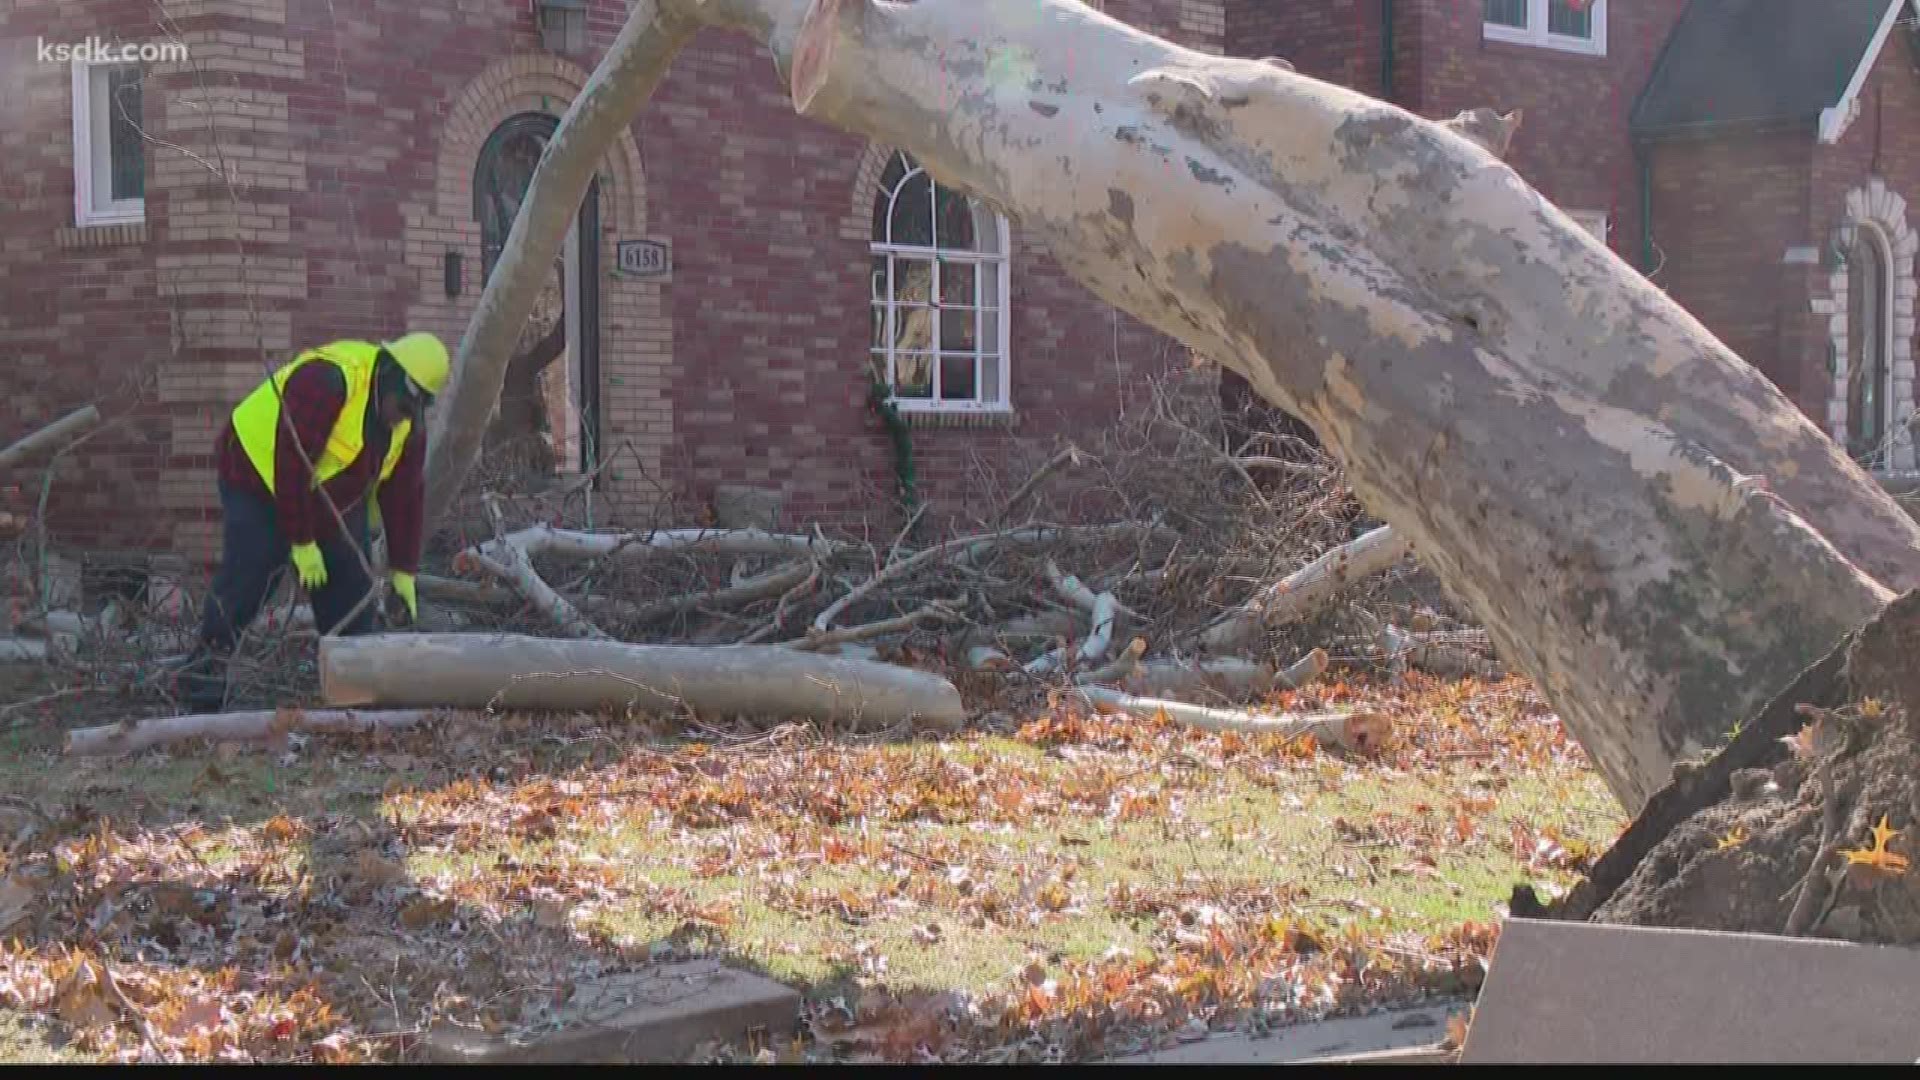 Instead of getting ready for Thanksgiving, several families around the area spent the day recovering from strong winds